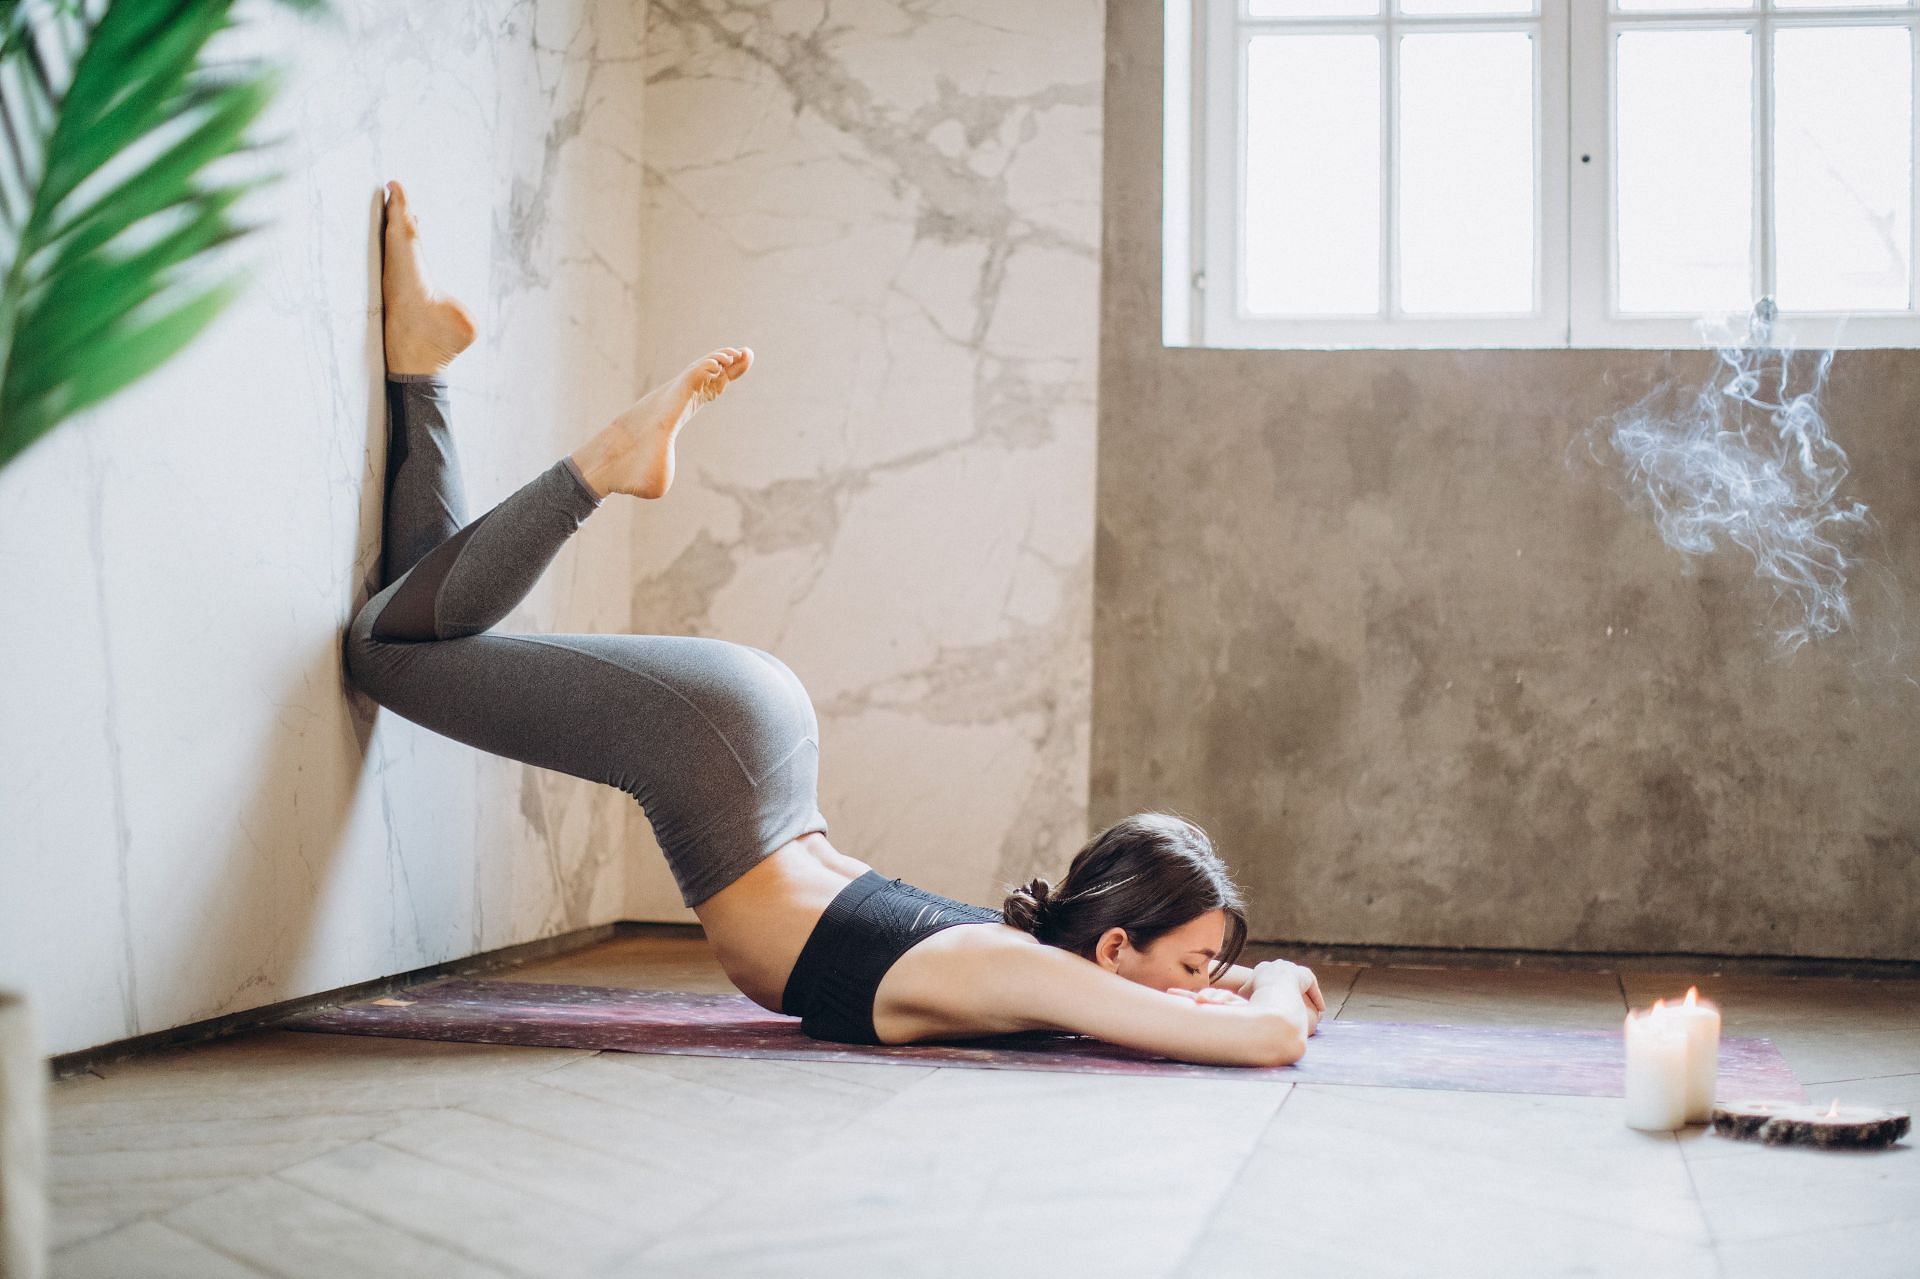 Off-the-wall exercises add a challenge that frequently calls for additional strength, balance, or a mix of both. (Image via Unsplash/ Elina Fairytale)